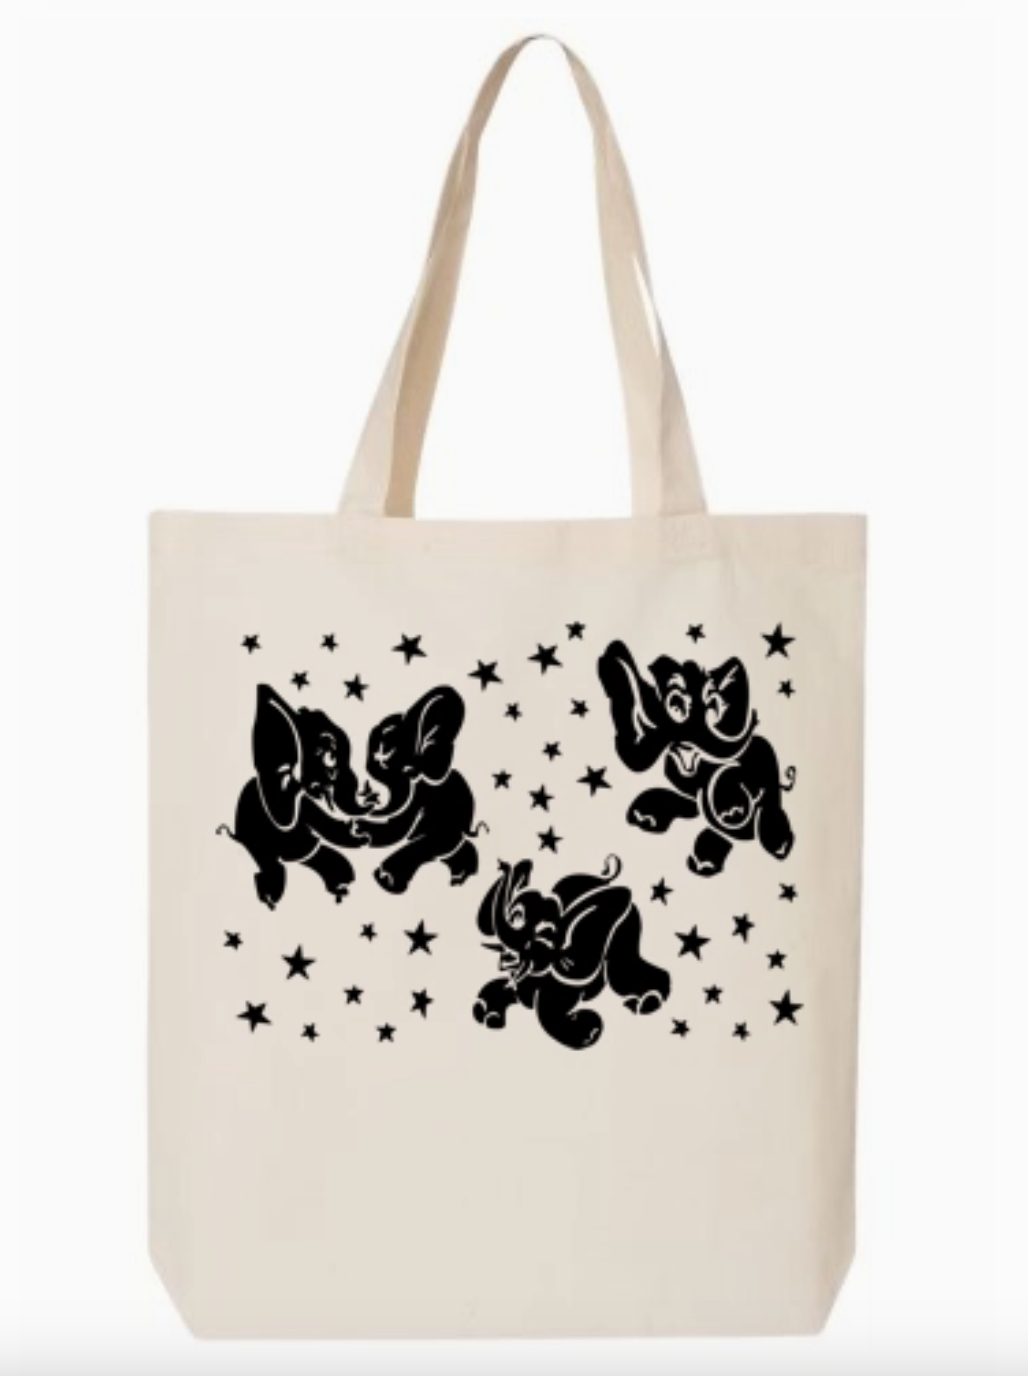 Black Dancing Elephants Carry-All Tote